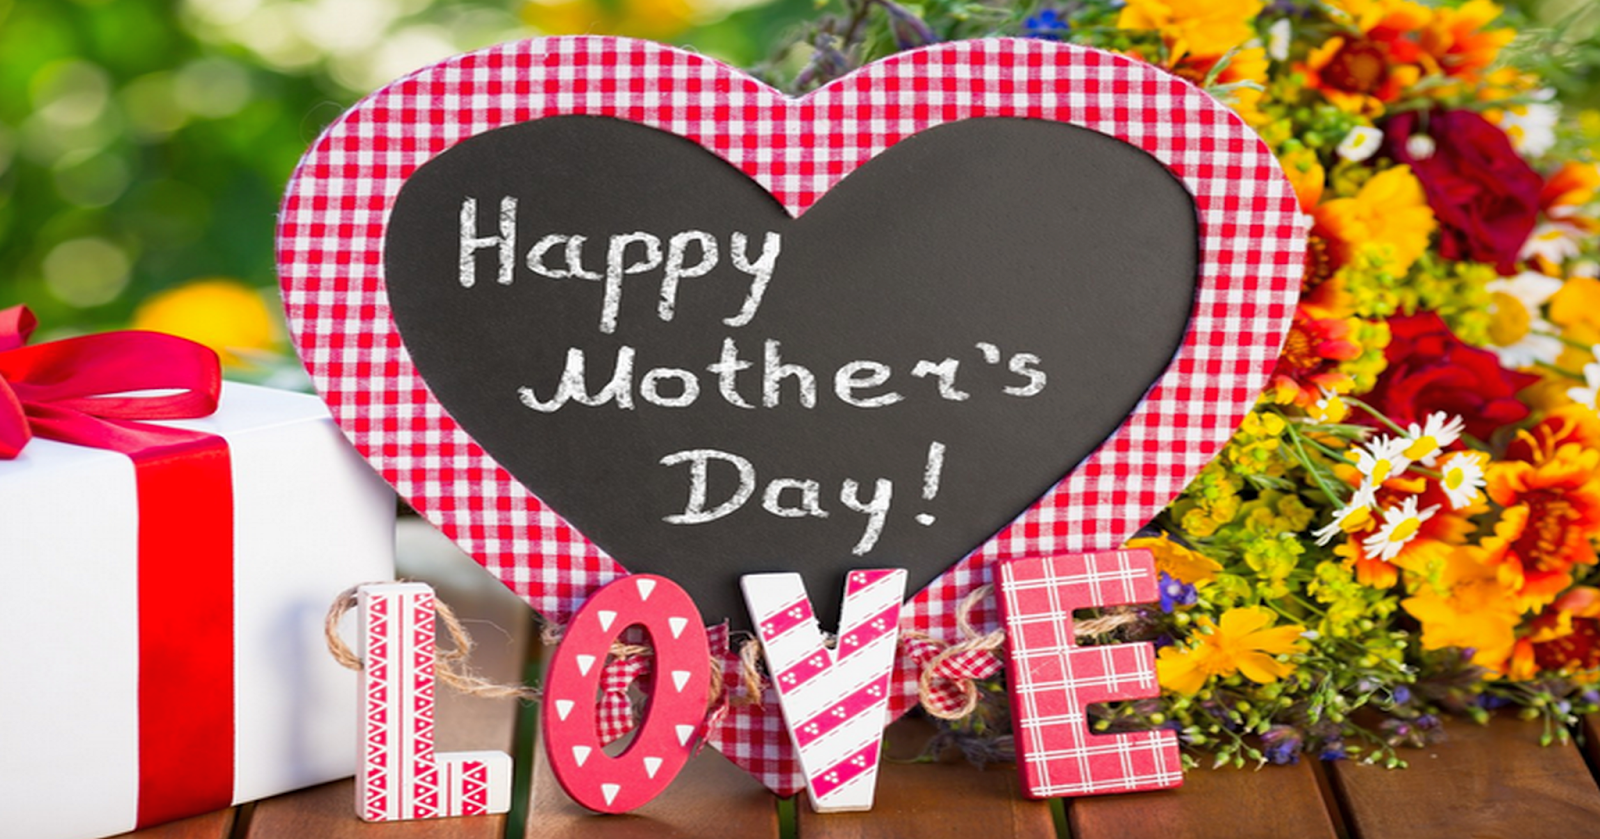 Happy Mothers Day Wallpaper Mothers Day Wallpaper Hd - Happy Mothers Mothers Day Images 2018 , HD Wallpaper & Backgrounds